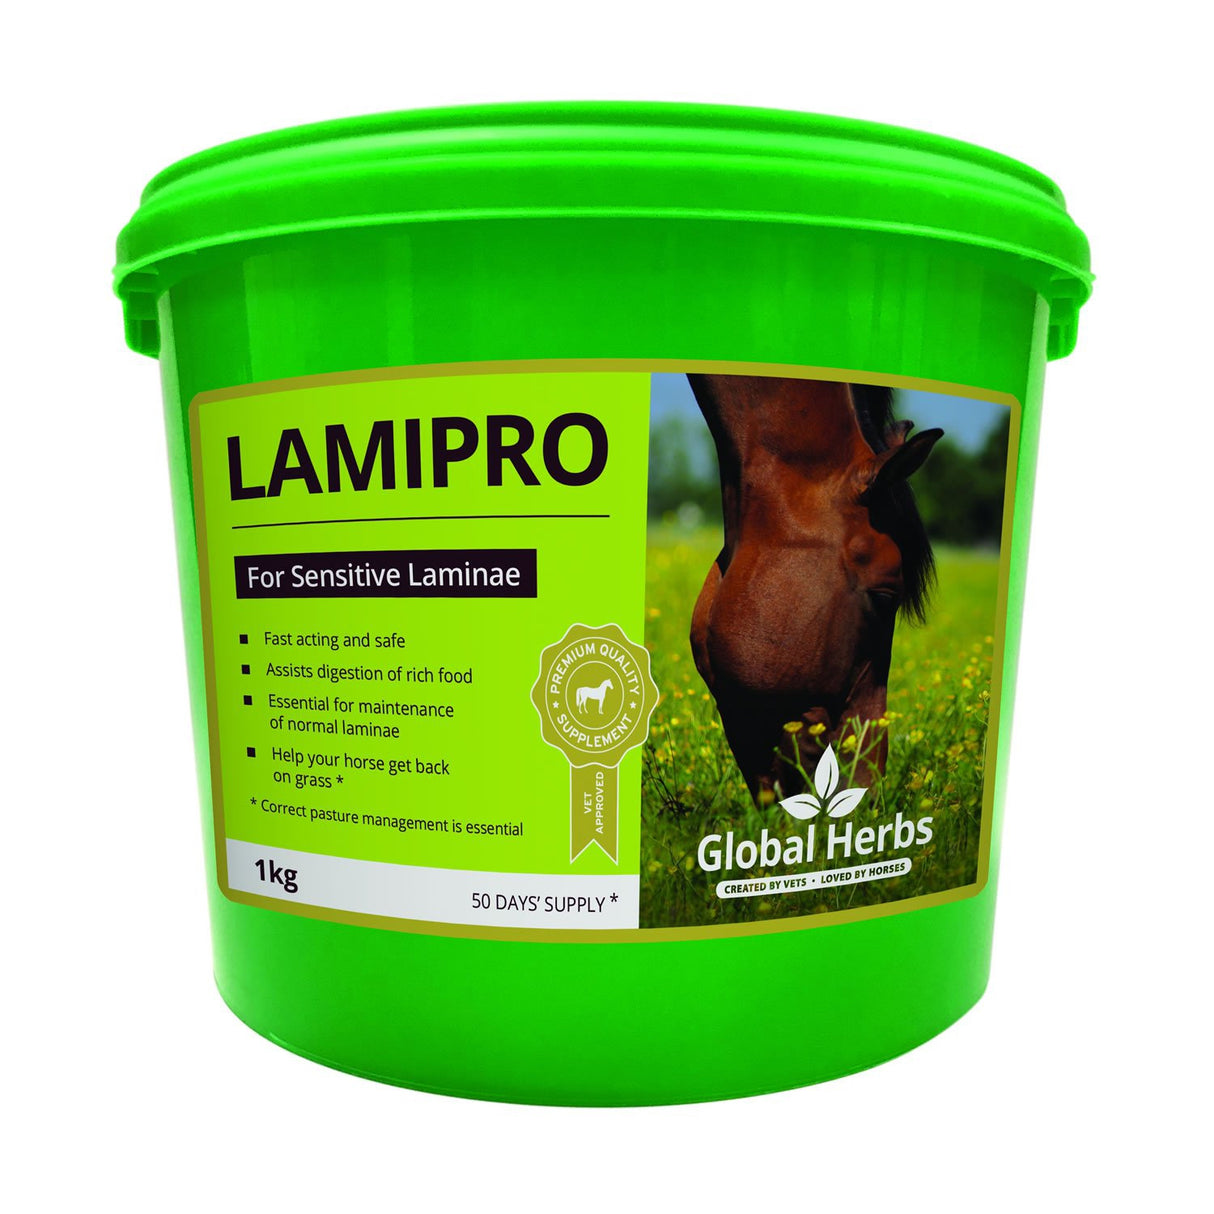 Global Herbs LamiPro Pulver